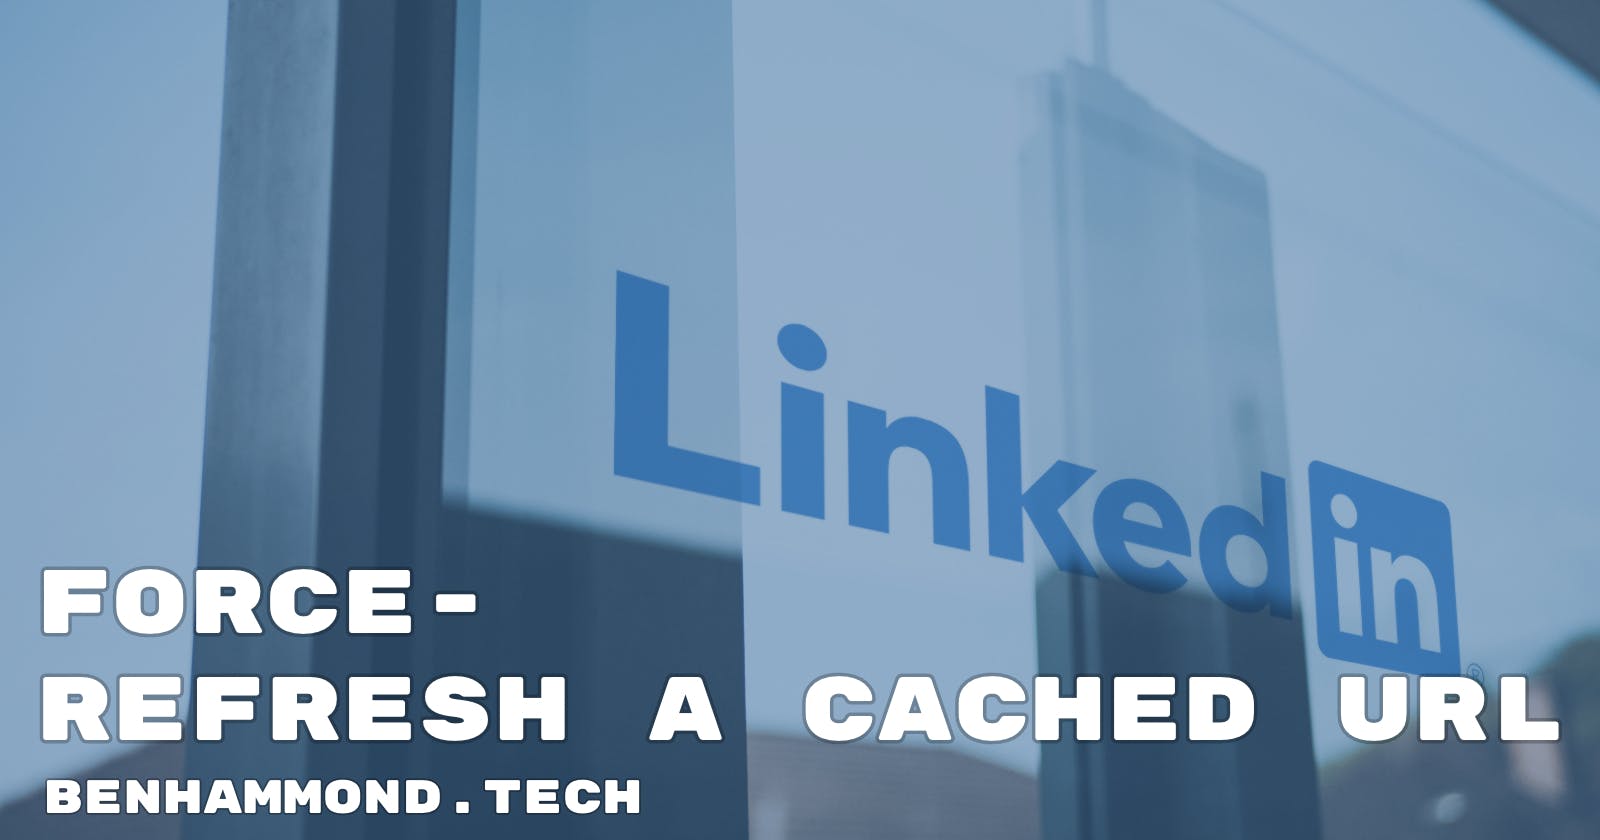 Force LinkedIn to Refresh a Cached URL